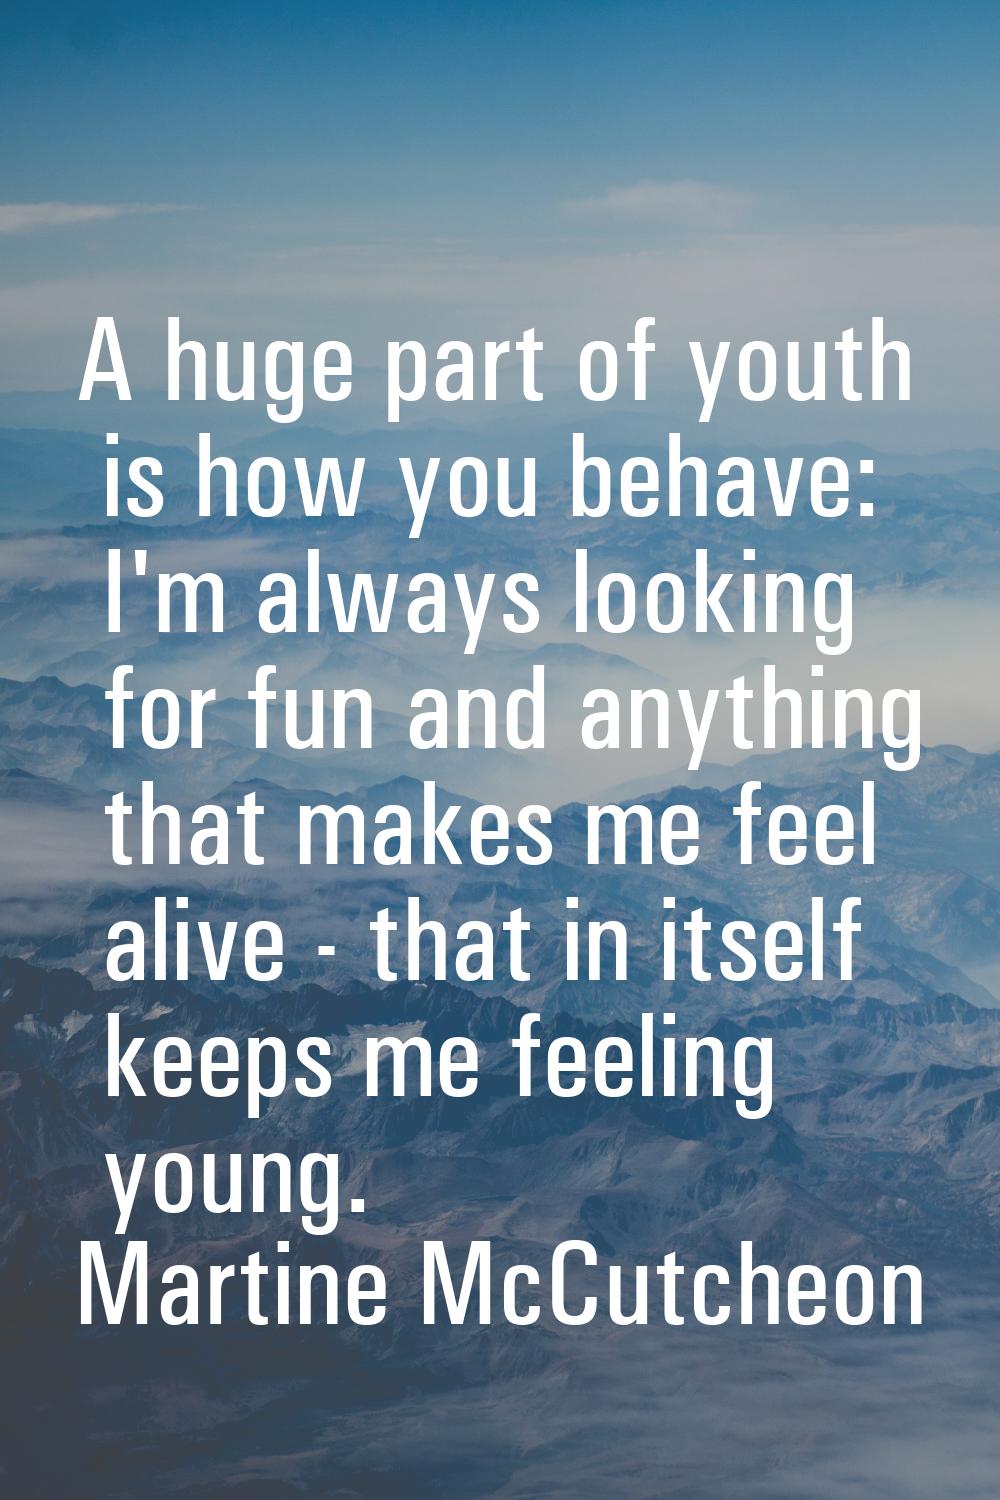 A huge part of youth is how you behave: I'm always looking for fun and anything that makes me feel 